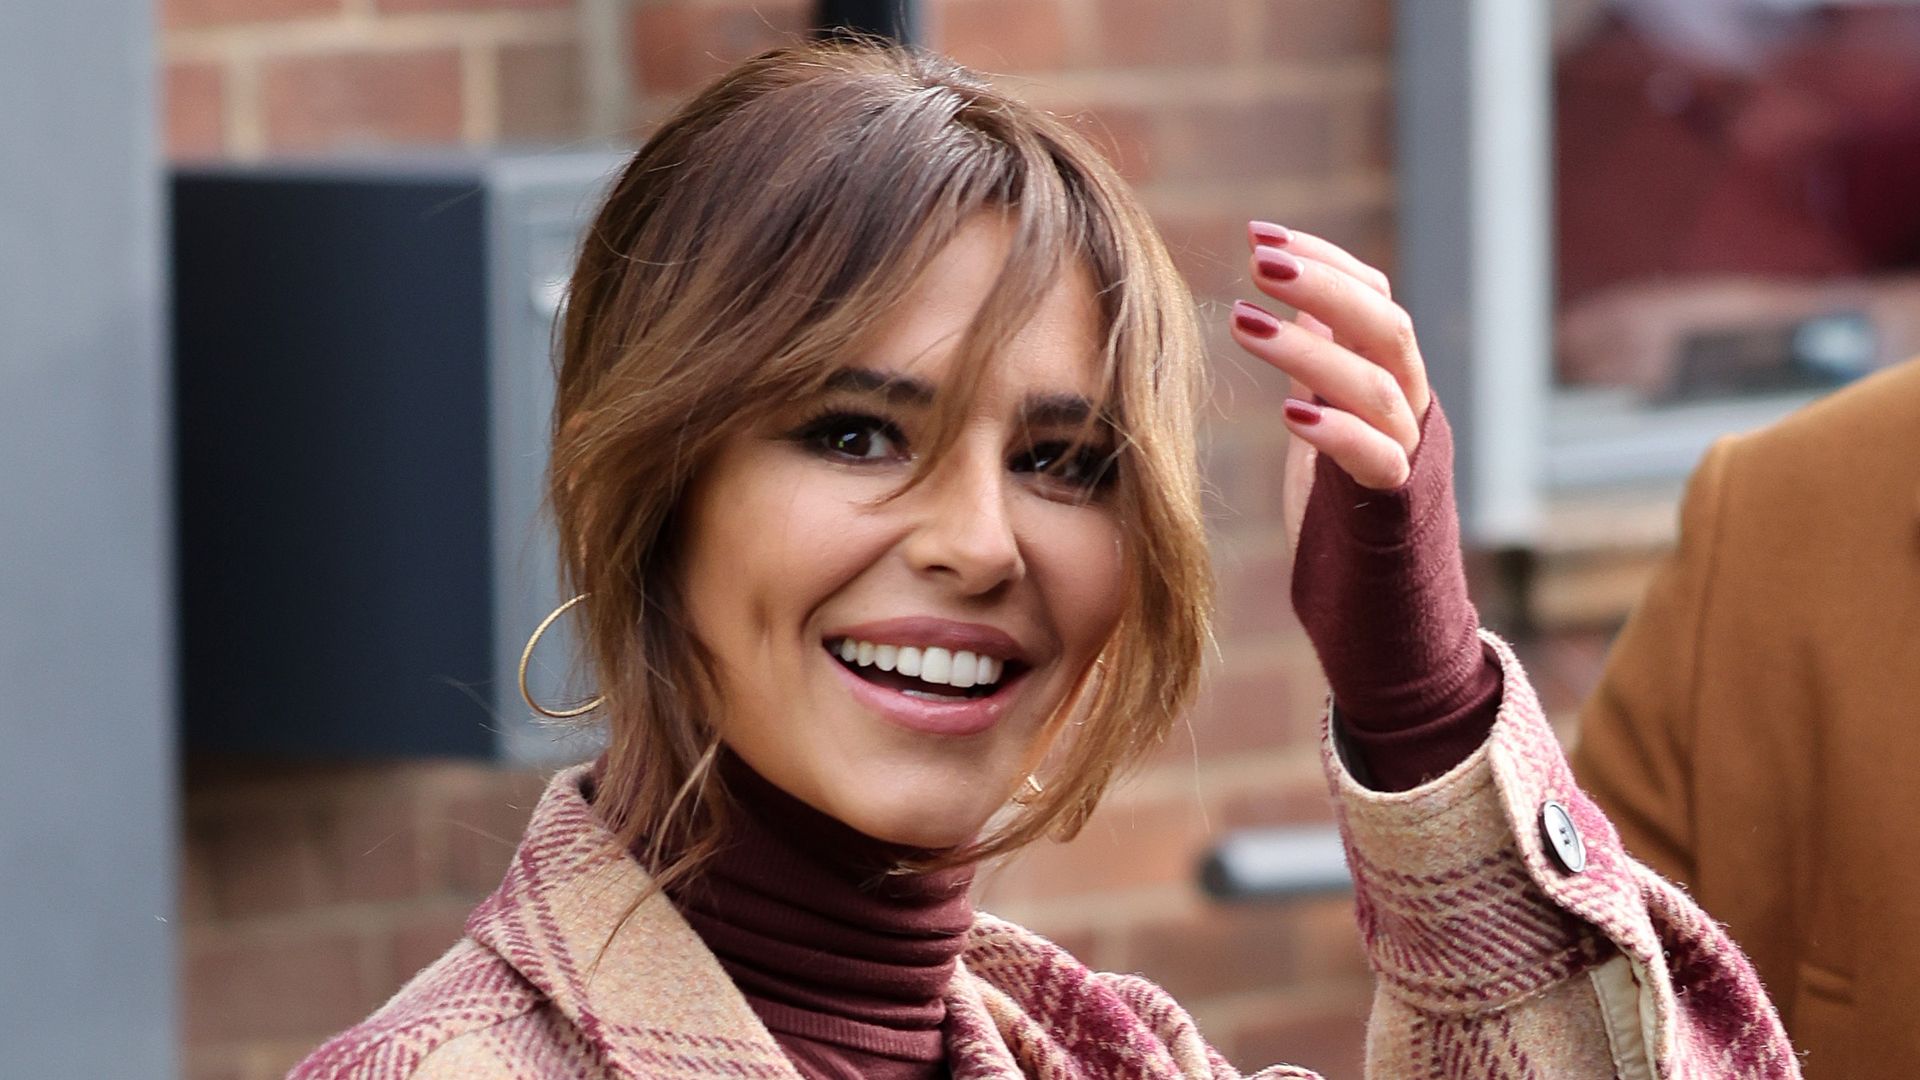 Cheryl in a tweed coat and maroon outfit